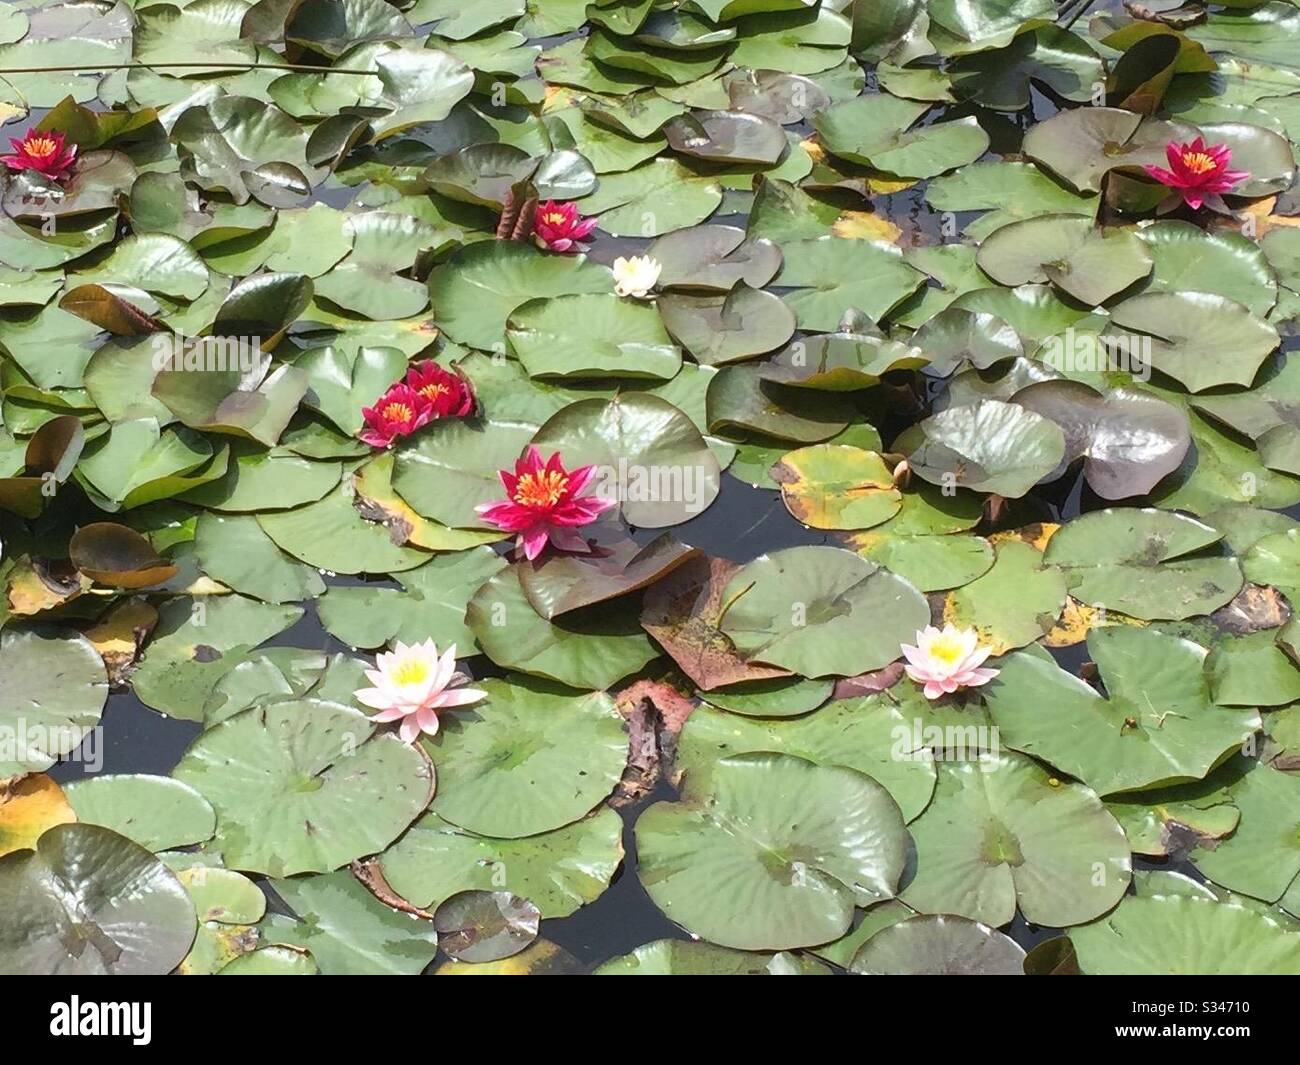 Water lilies afloat in the pond on a mass of green foliage Stock Photo